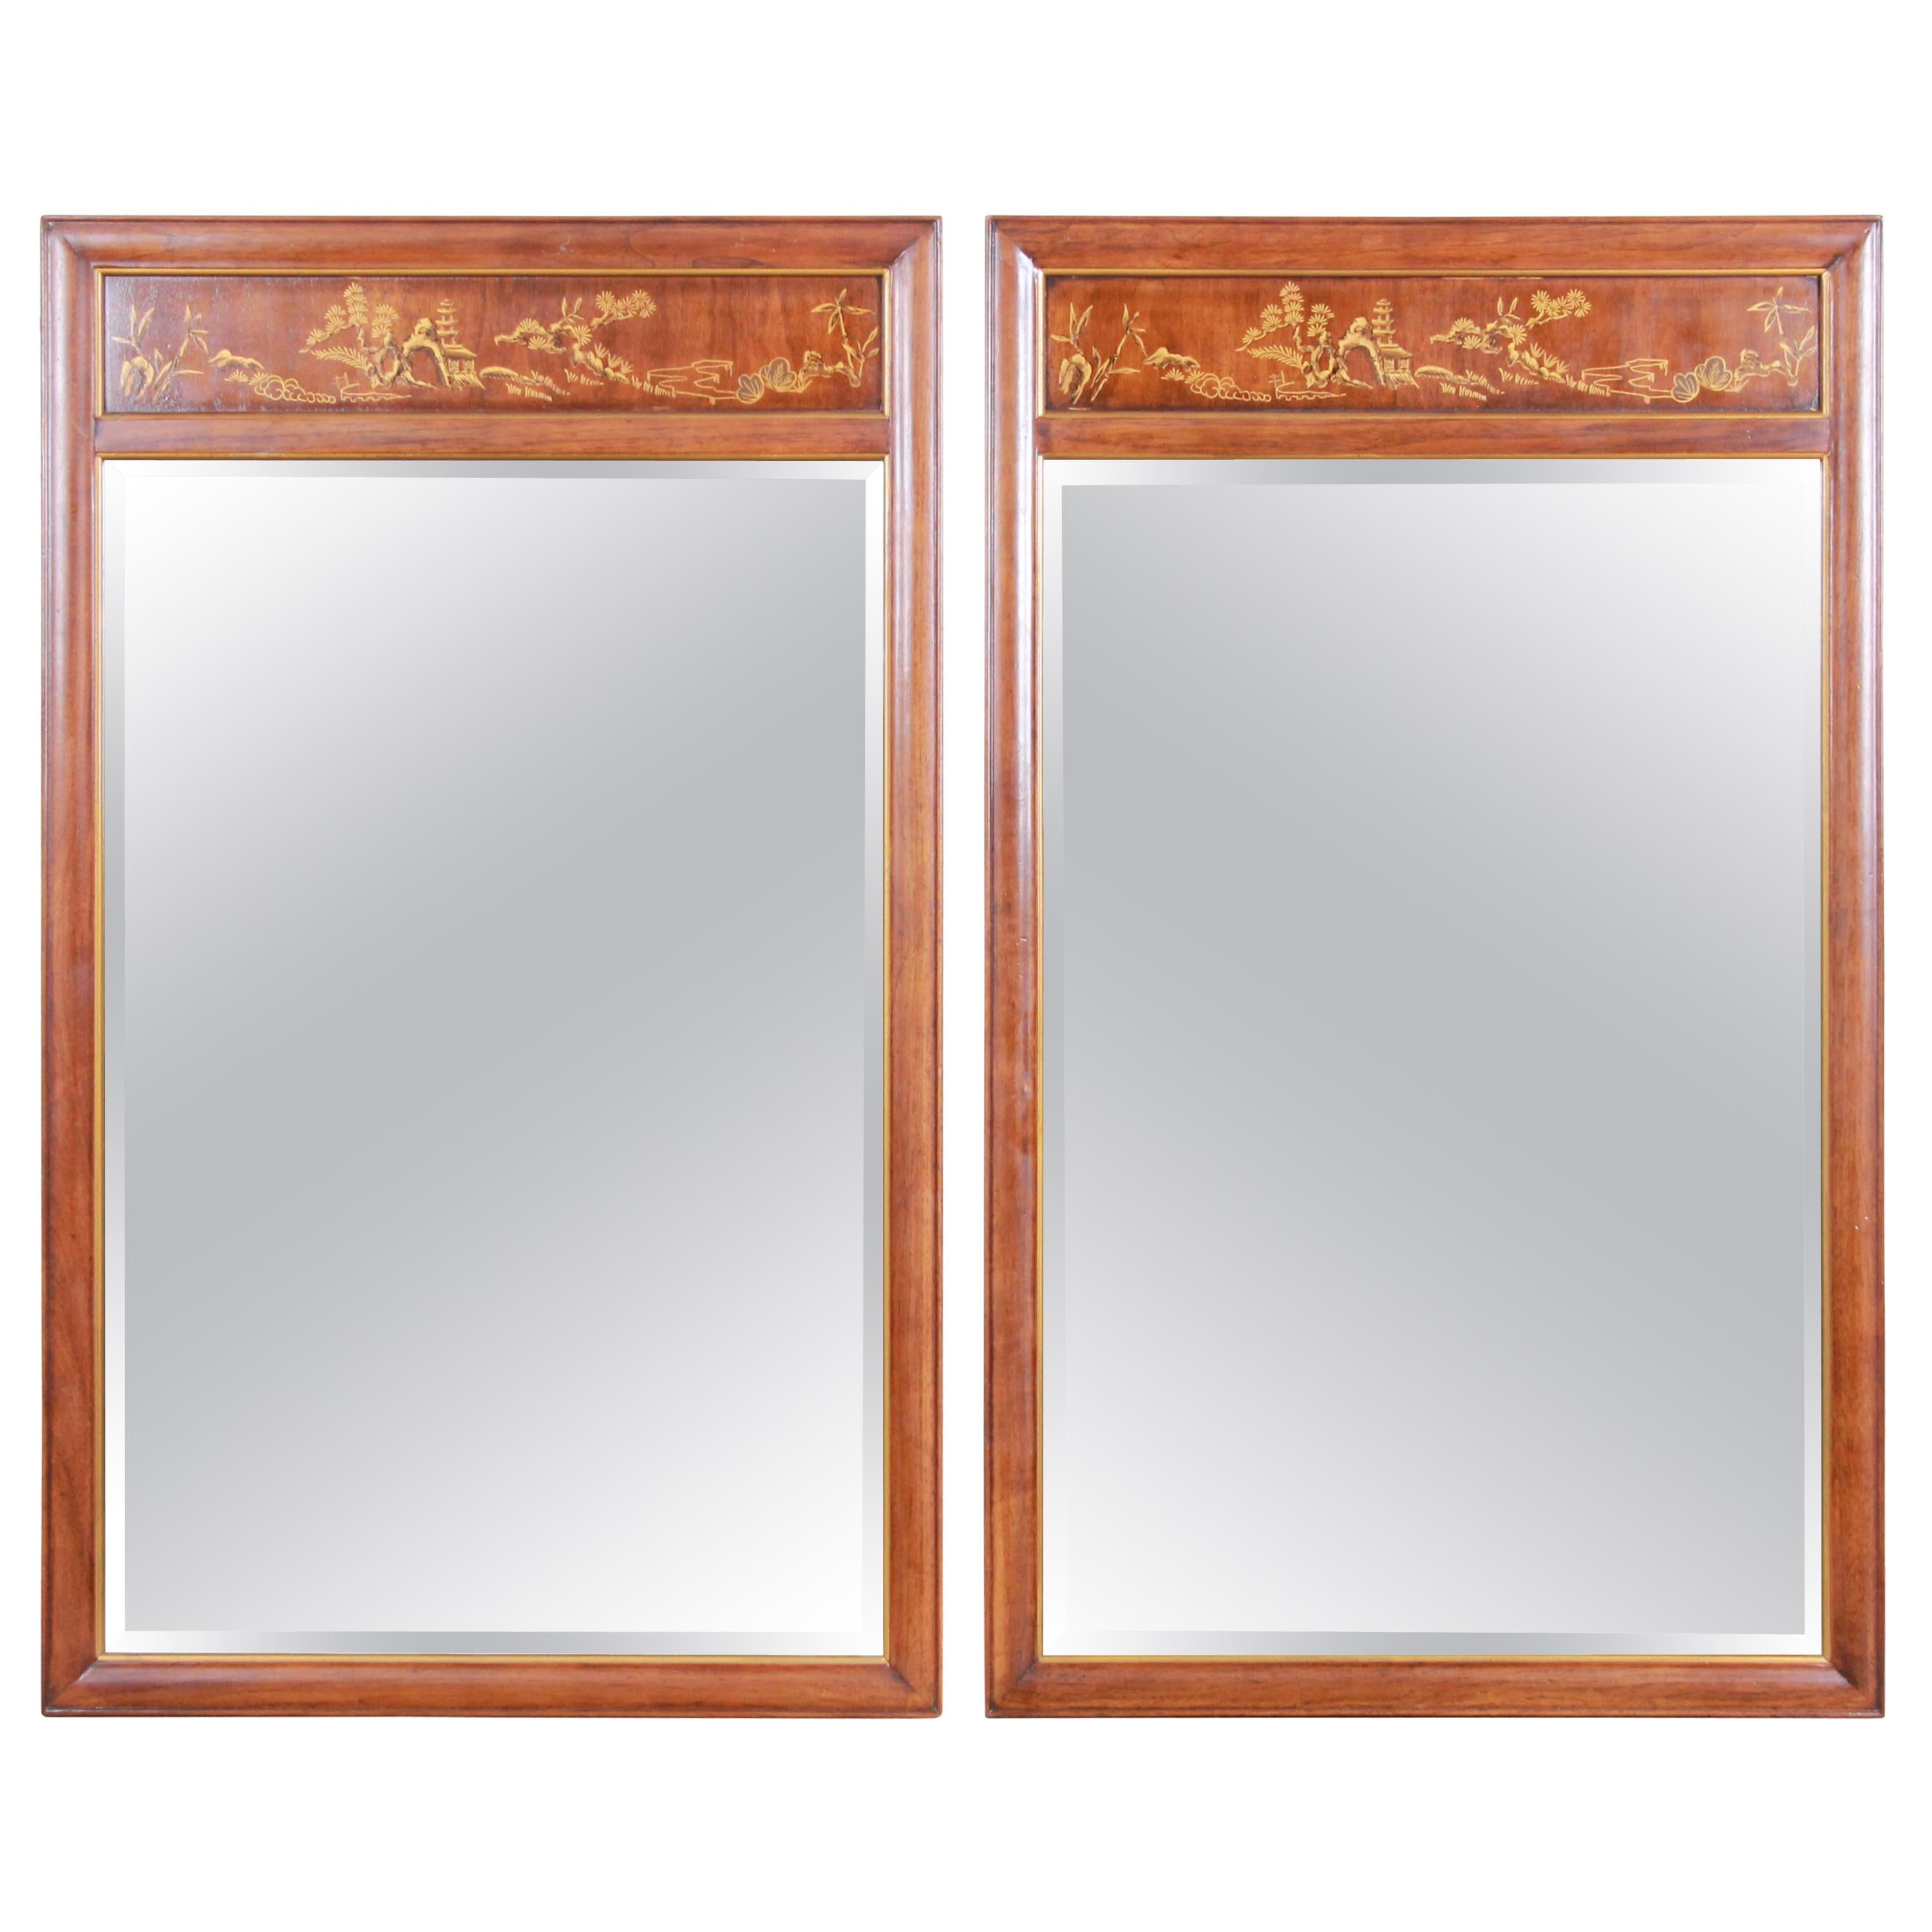 Drexel Heritage Hollywood Regency Chinoiserie Wall Mirrors, a Pair